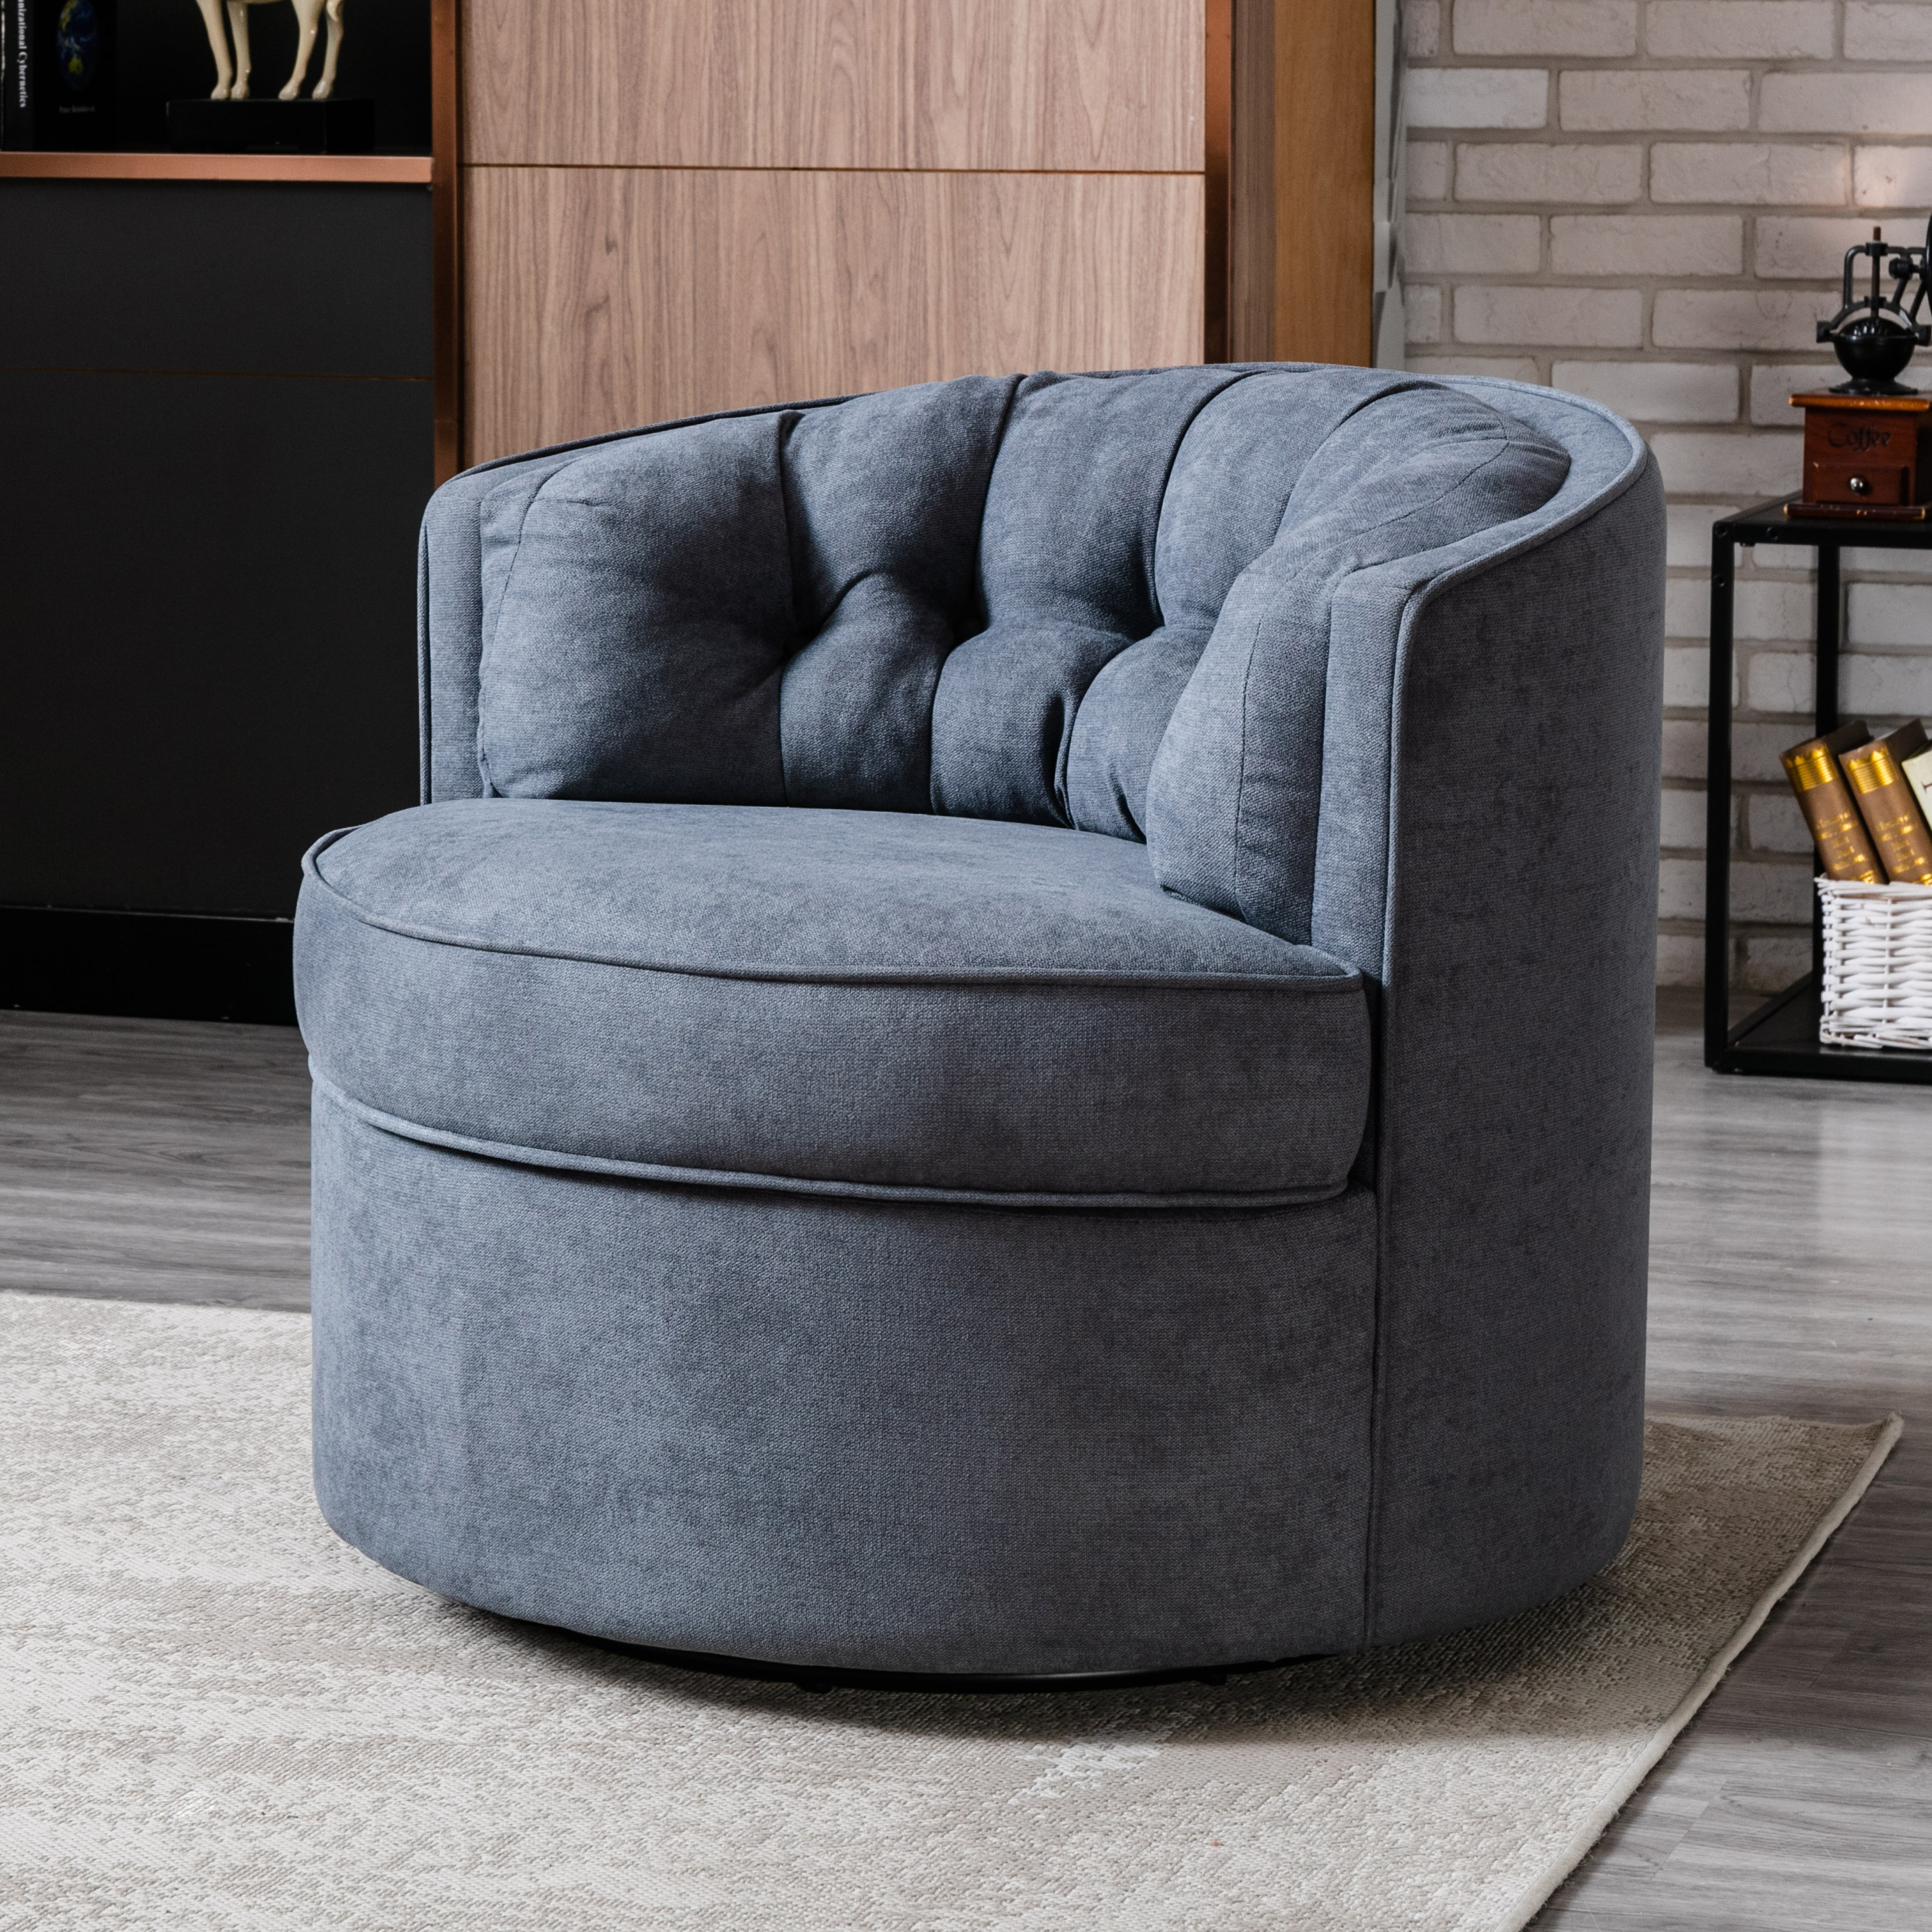 33&rdquo; Wide Swivel Barrel Chair Comfy Tufted Back Accent Round Barrel Chair Leisure Chair for Living Room, Bedroom, Hotel-Boyel Living